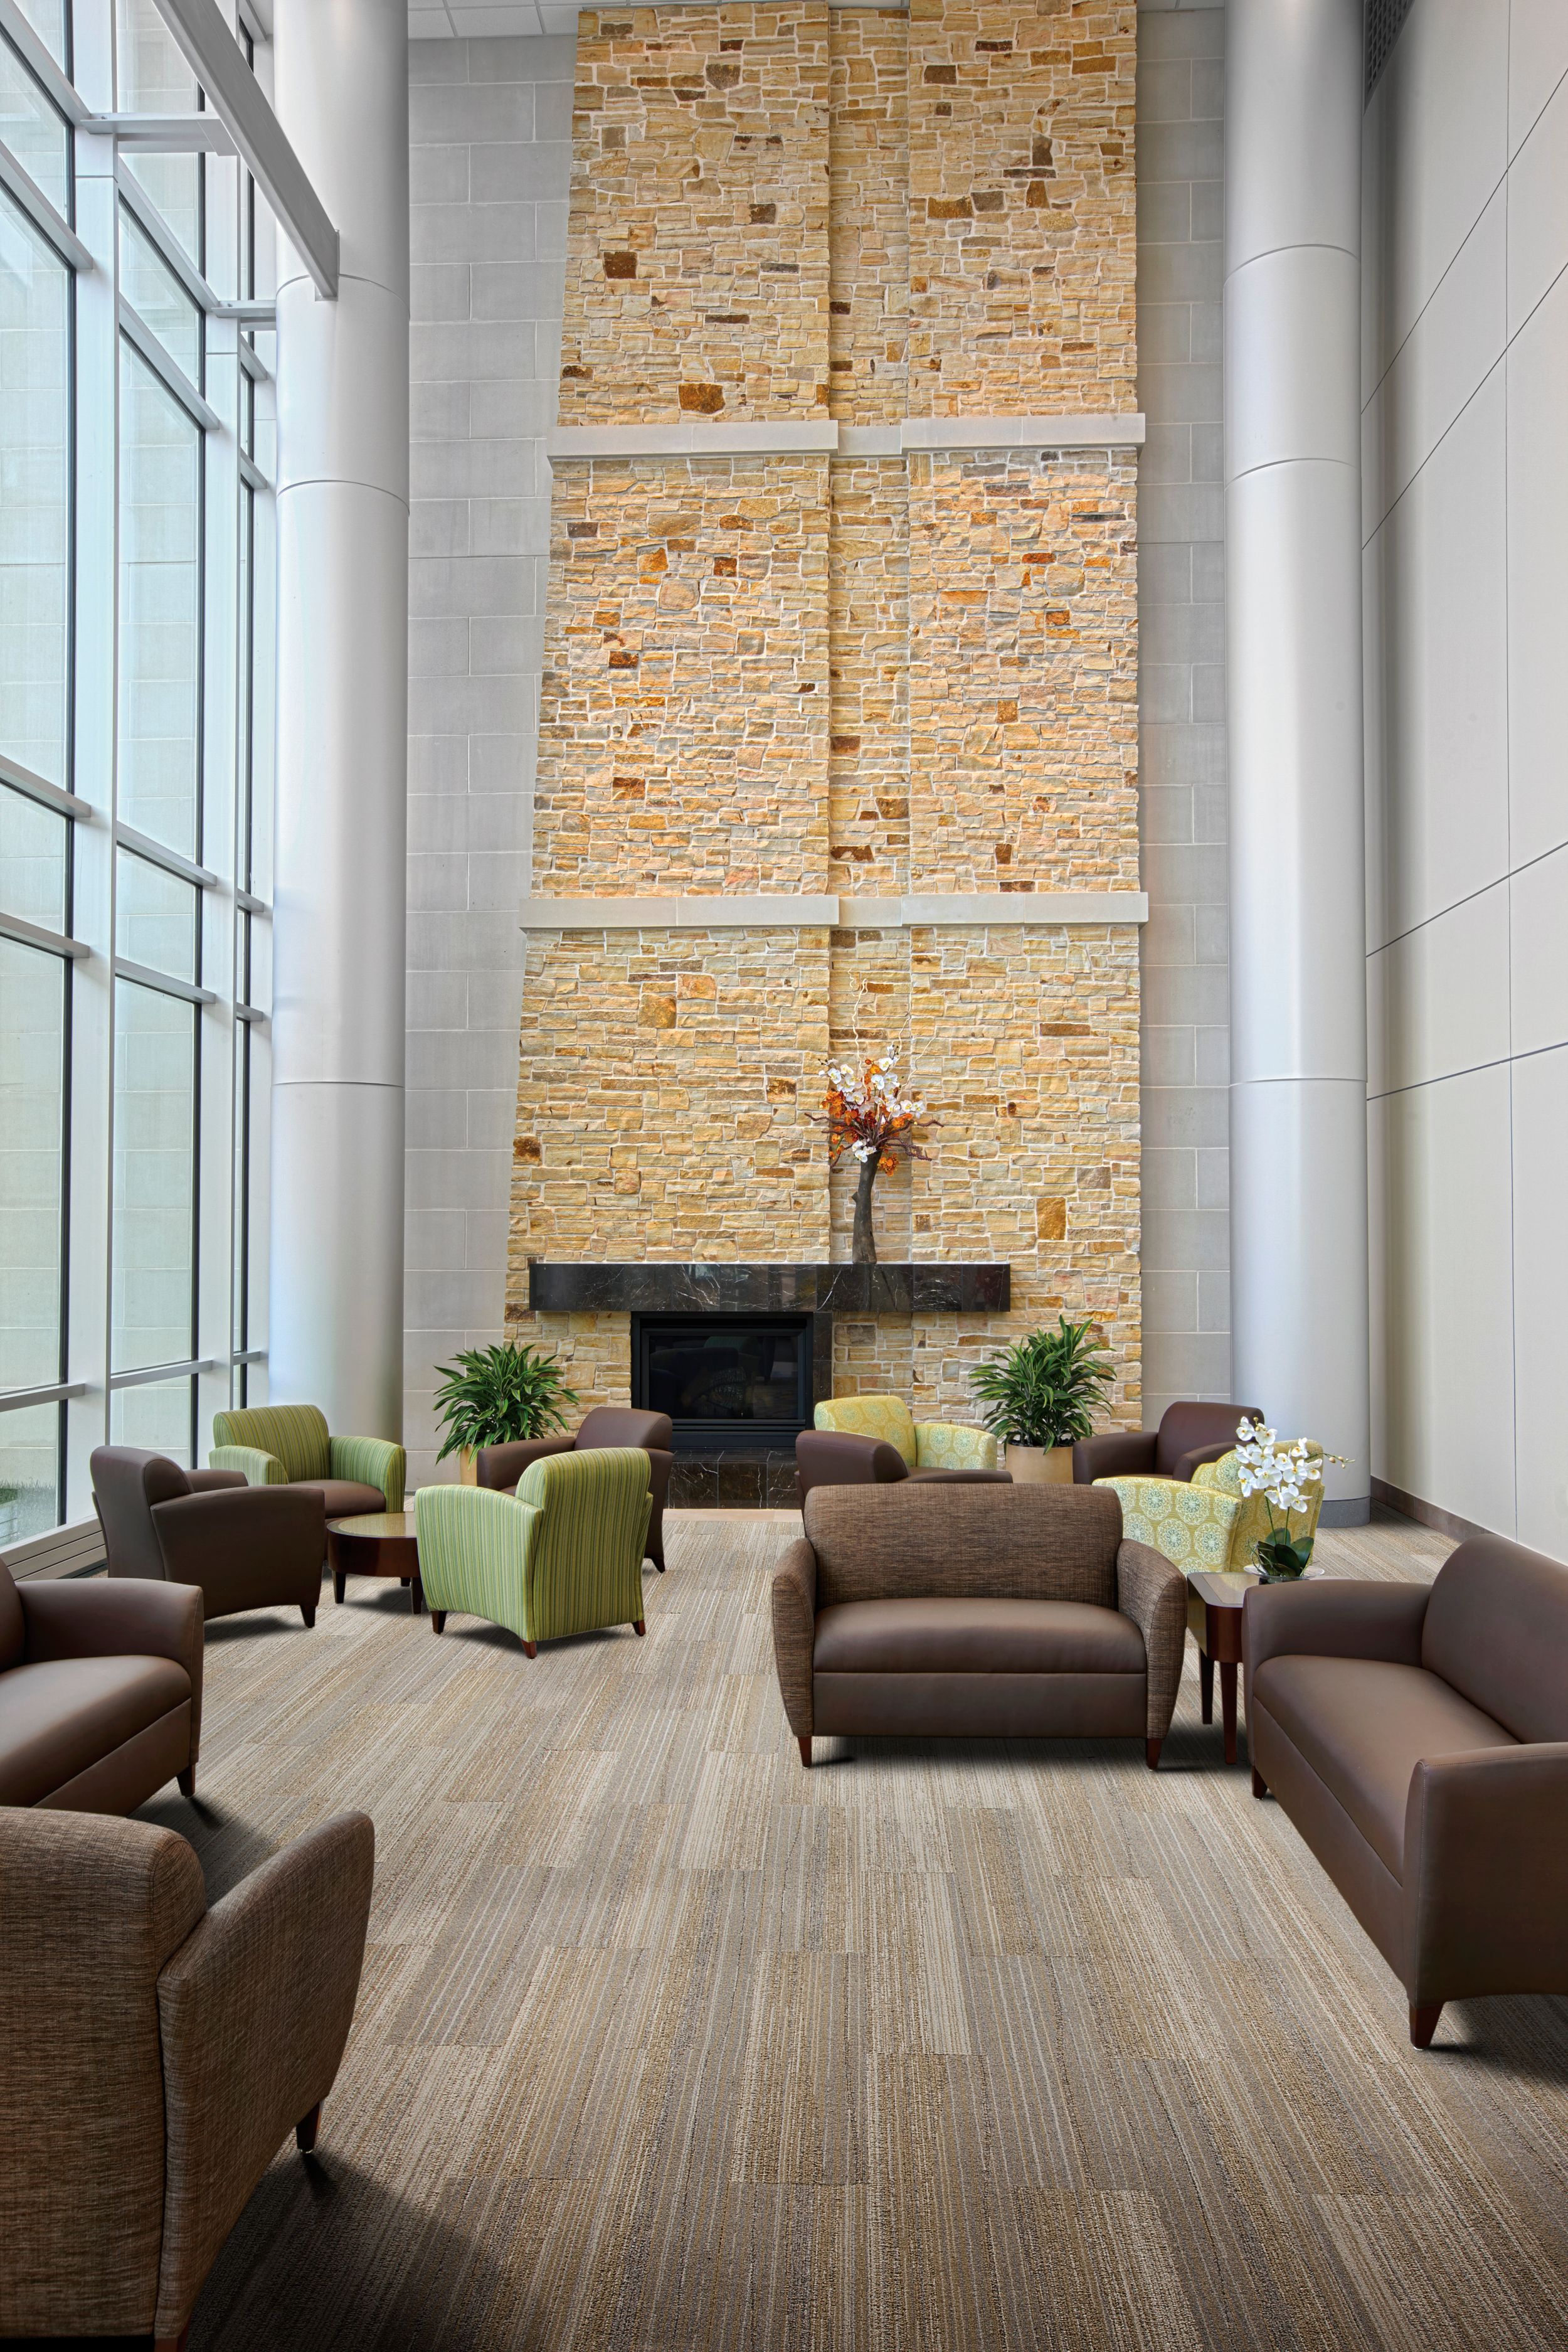 Interface Walk the Plank plank carpet tile in healthcare waiting area with fireplace and floor to ceiling windows imagen número 13